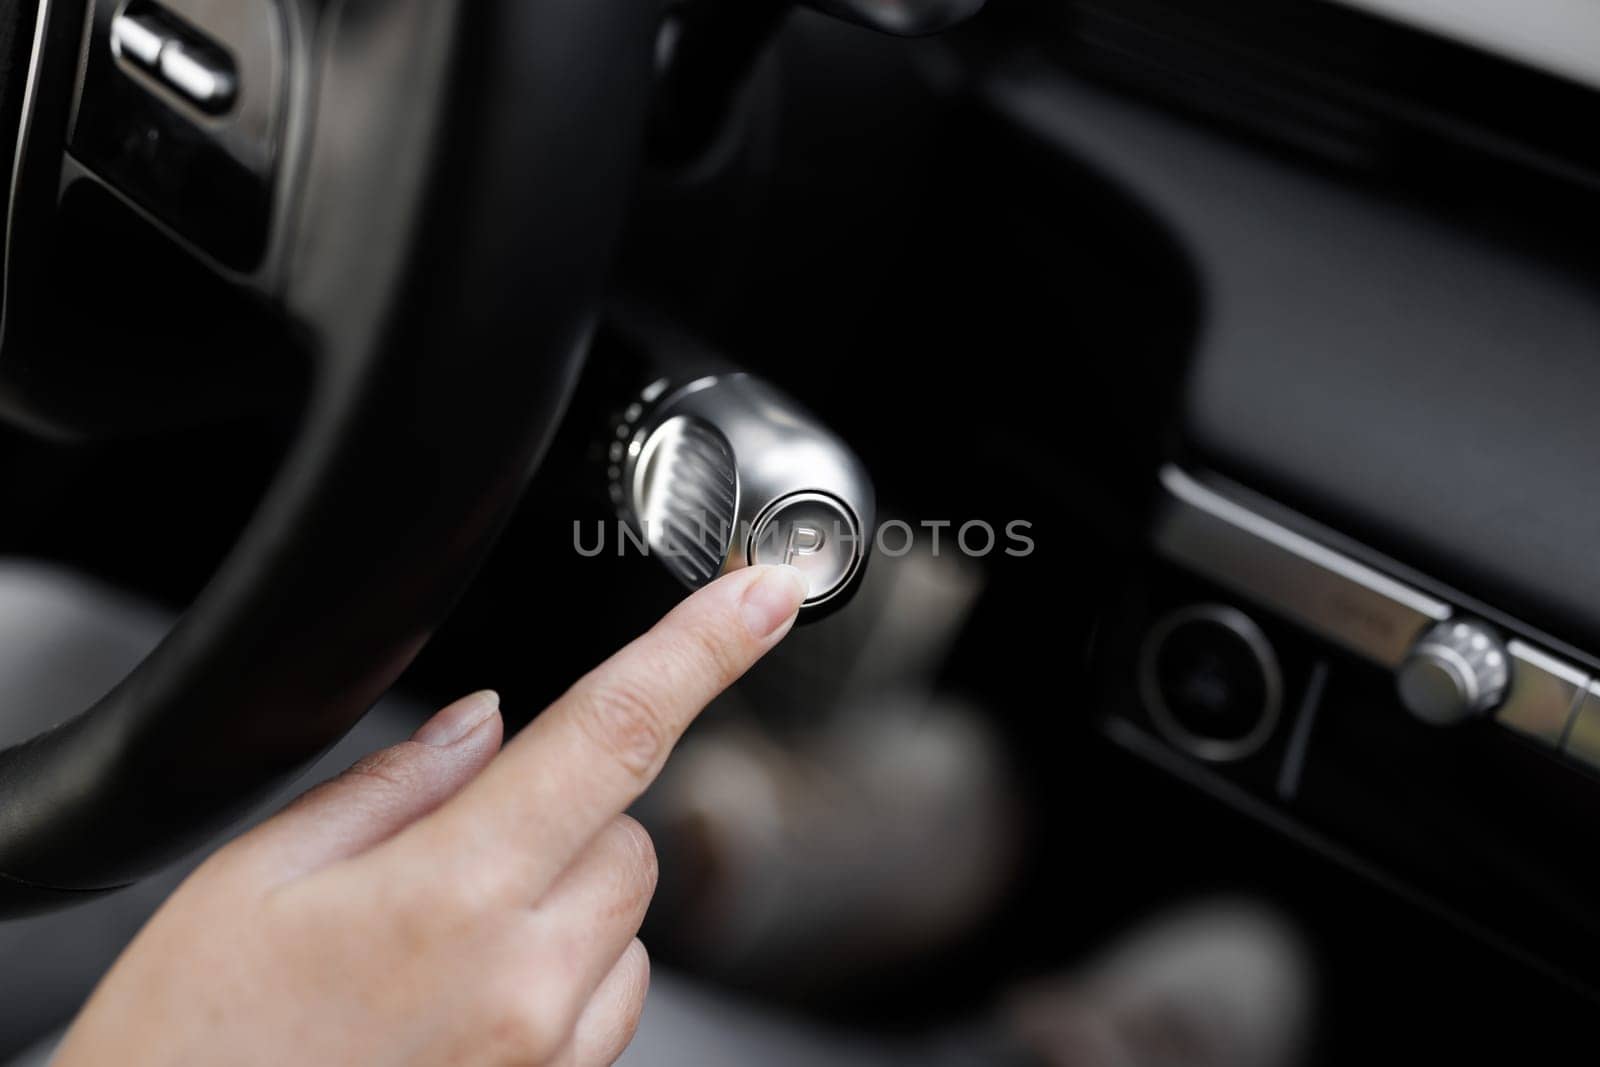 Shifting automatic transmission from P parking mode. Driver In Auto Gear Lever P Mode. The driver's hand moved the gear selector to the Parking mode in the electric car by uflypro